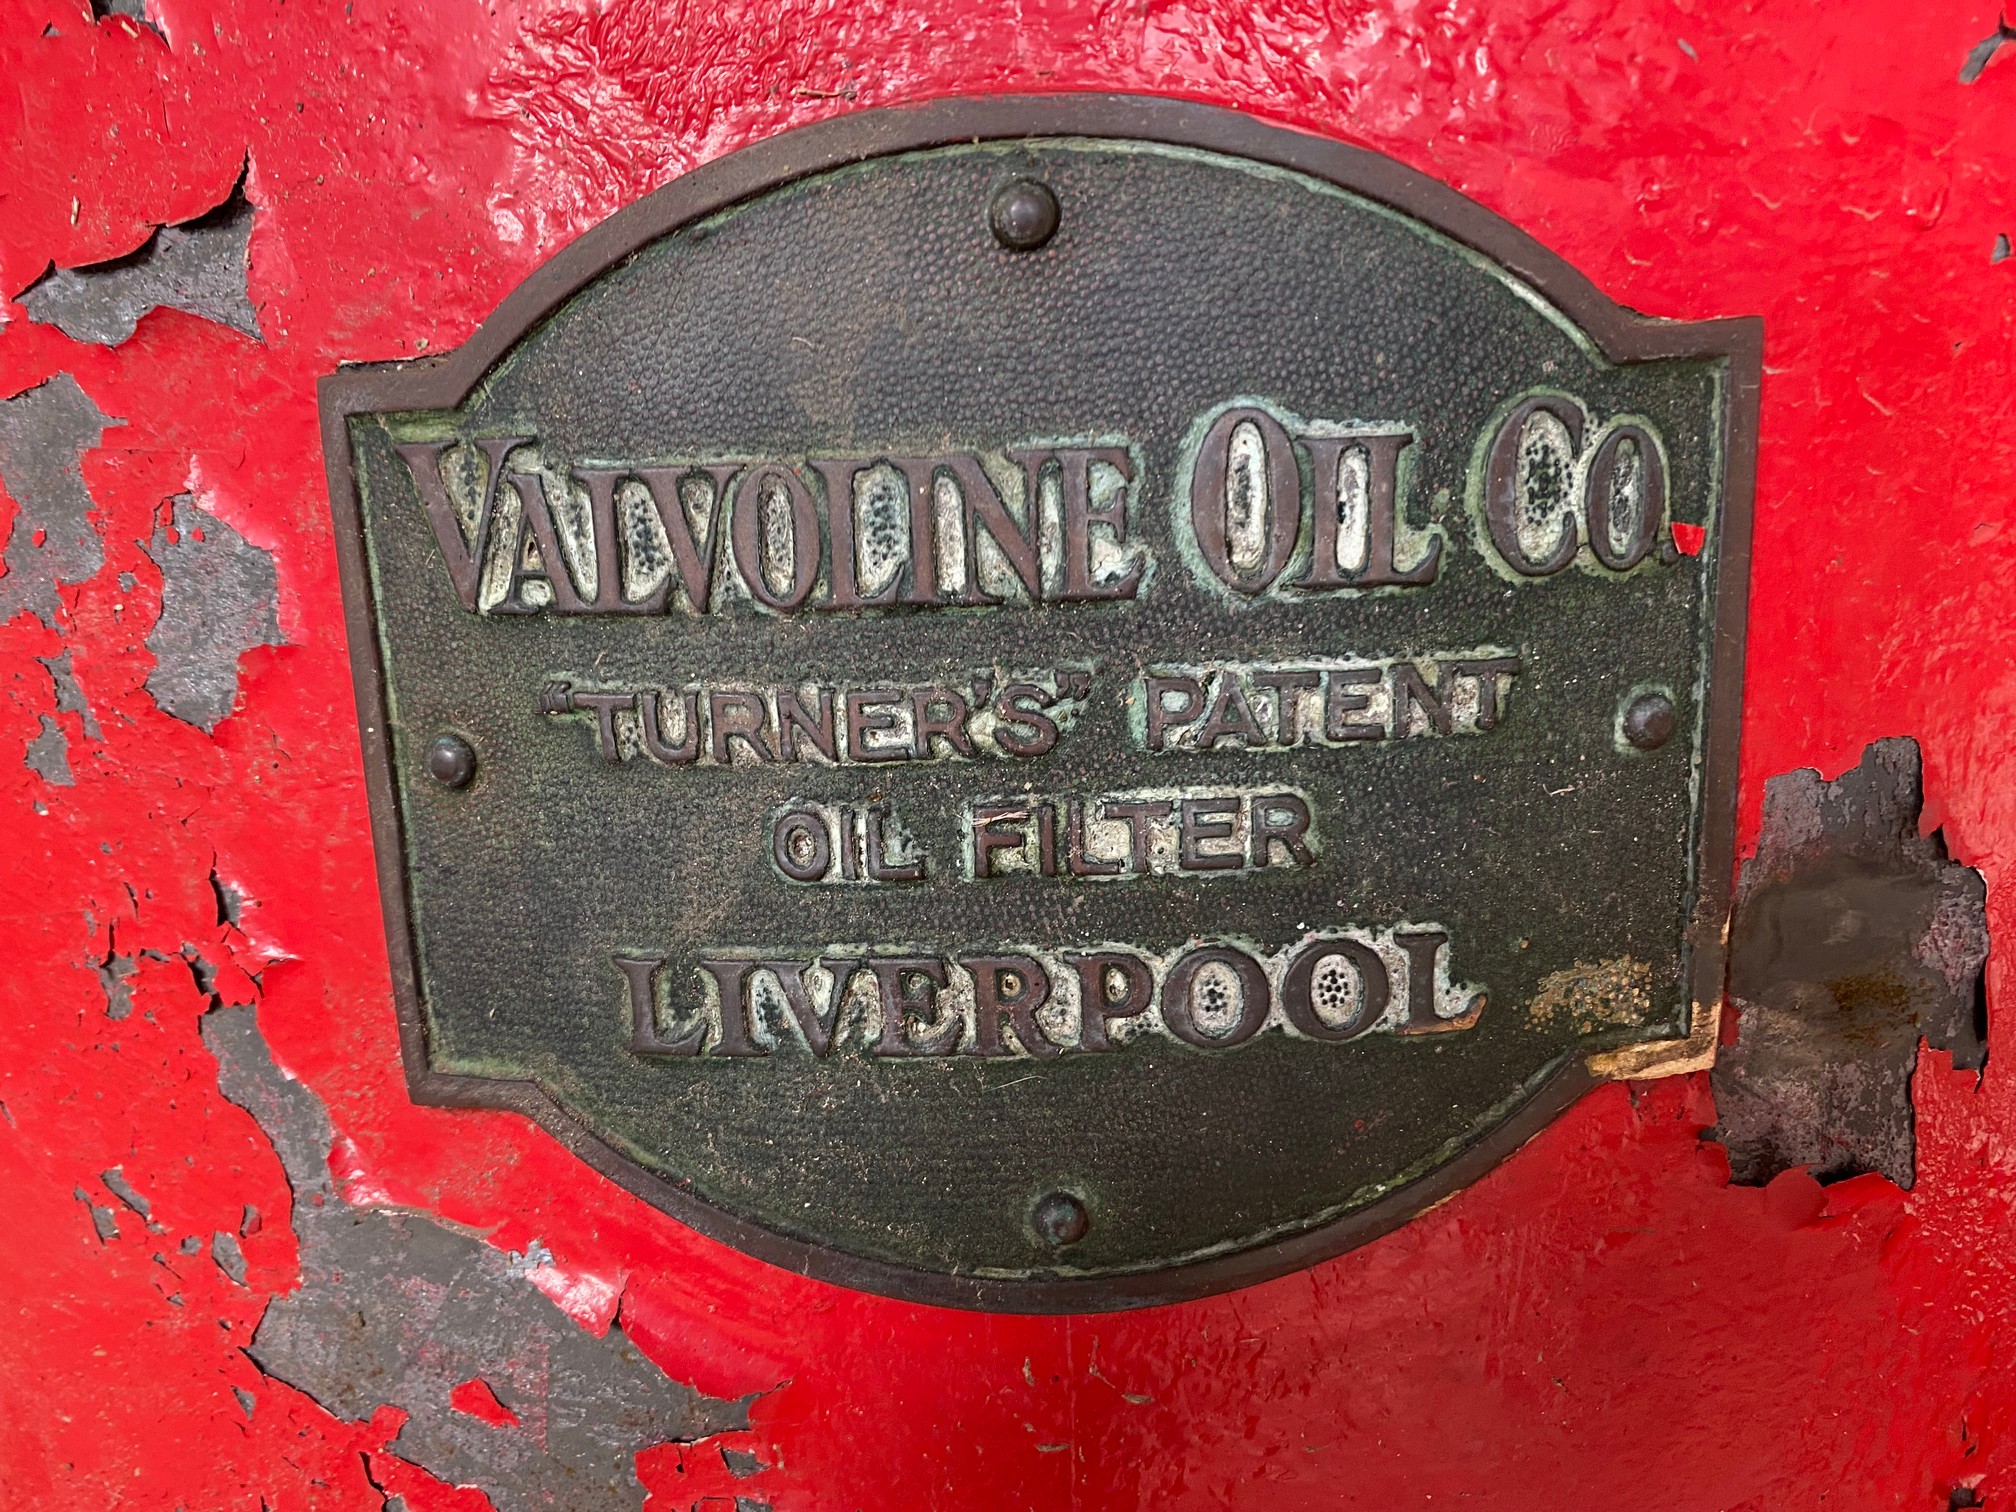 An unusual Valvoline Oil Co. Turner's Patent Oil Filter. - Image 2 of 3